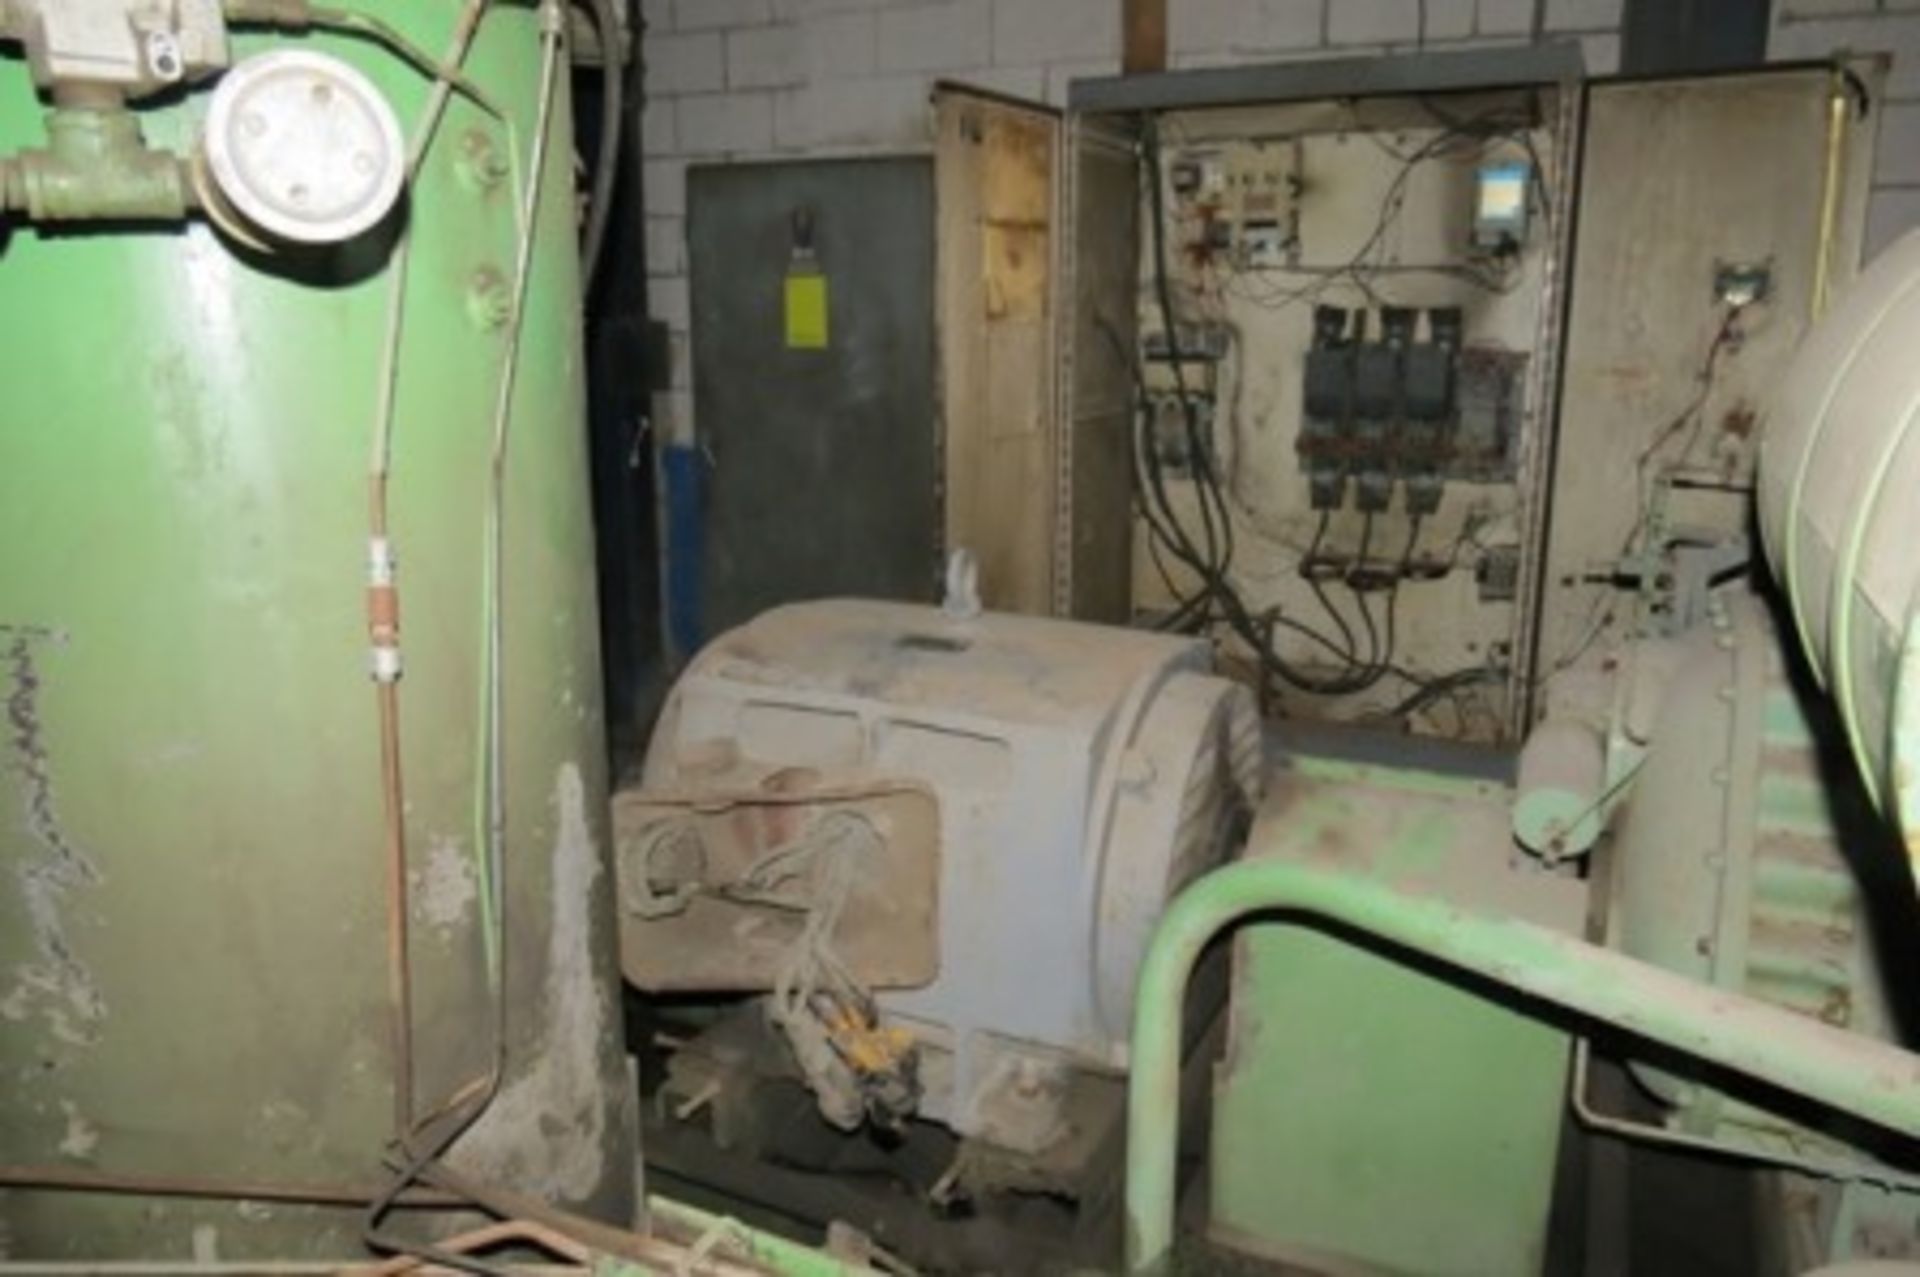 Air compressor Sullair 32 / 25-400L AC s/n 003-77334, 1989, rotary screw, 450 hp - Image 21 of 22